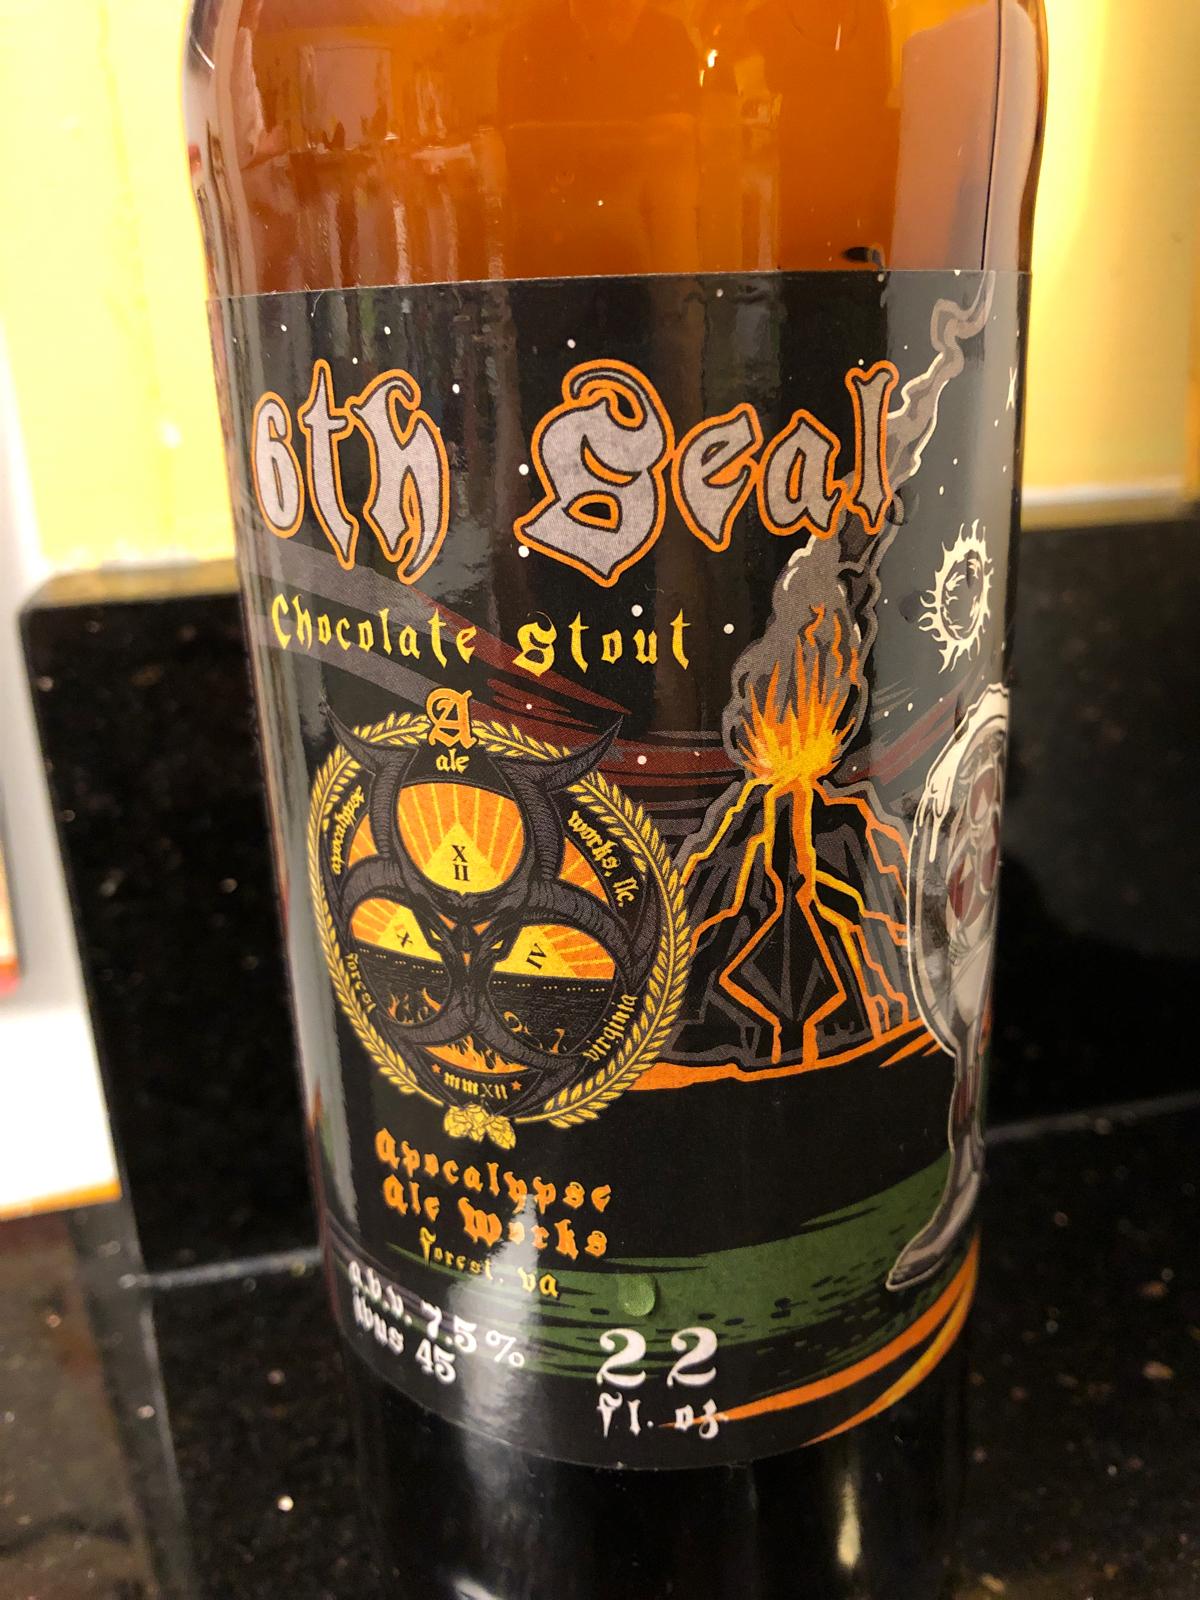 6th Seal Chocolate Stout